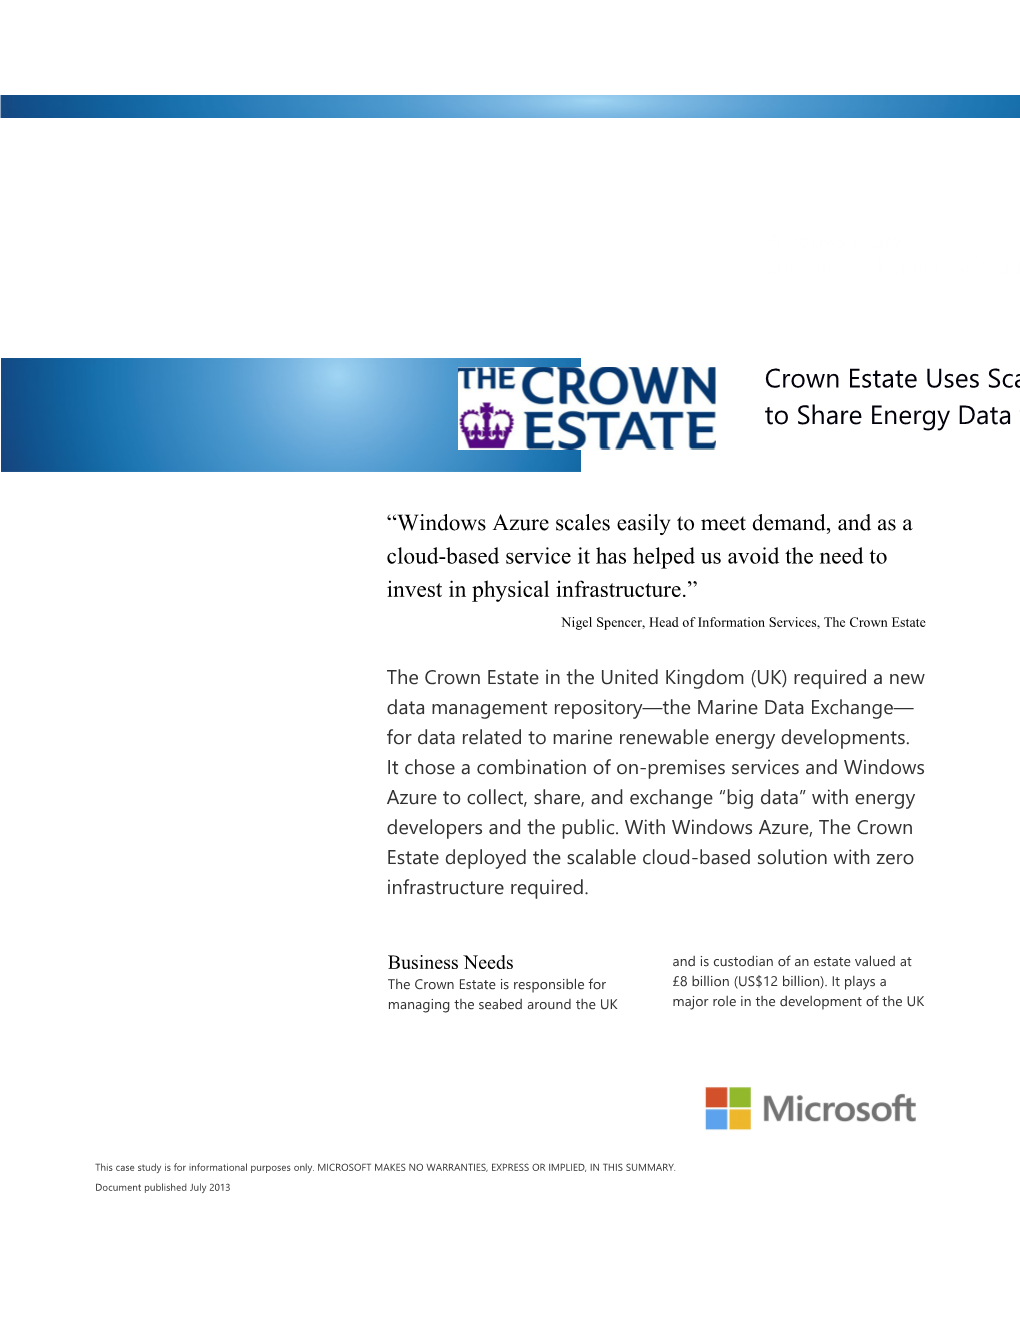 Writeimage CSB Crown Estate Uses Scalable Cloud Solution to Share Marine Renewable Energy